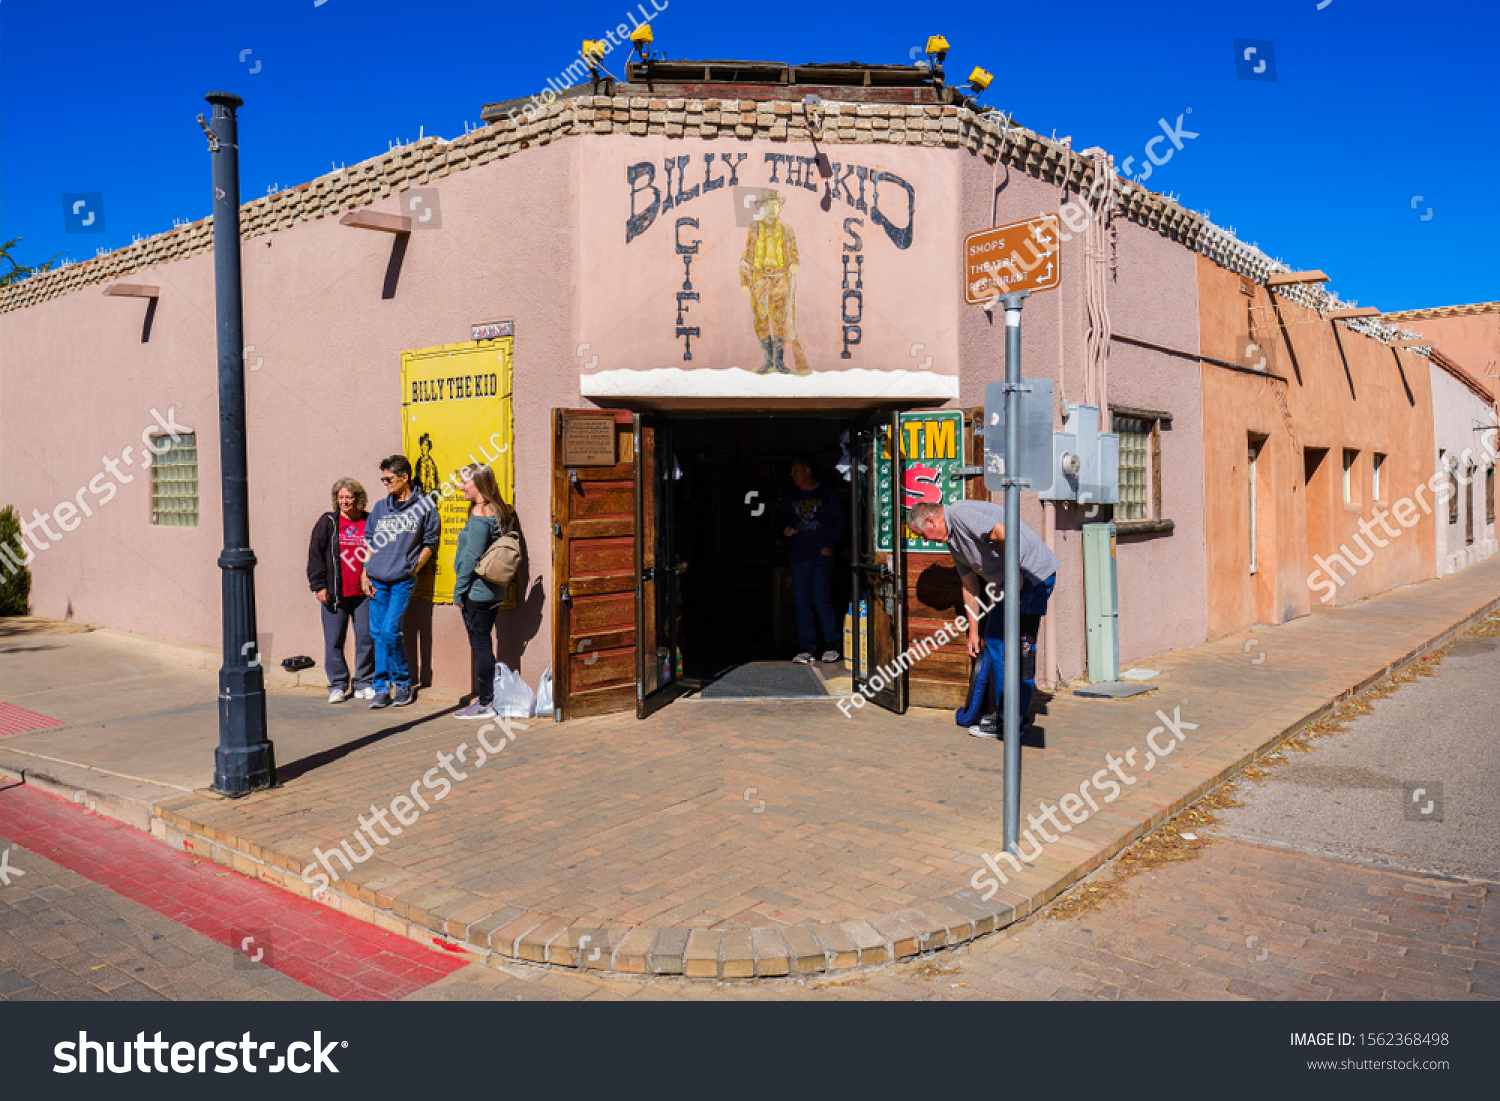 Stock Photo Mesilla New Mexico Usa October The Gift Shop Across From The Town Square Is The 1562368498 